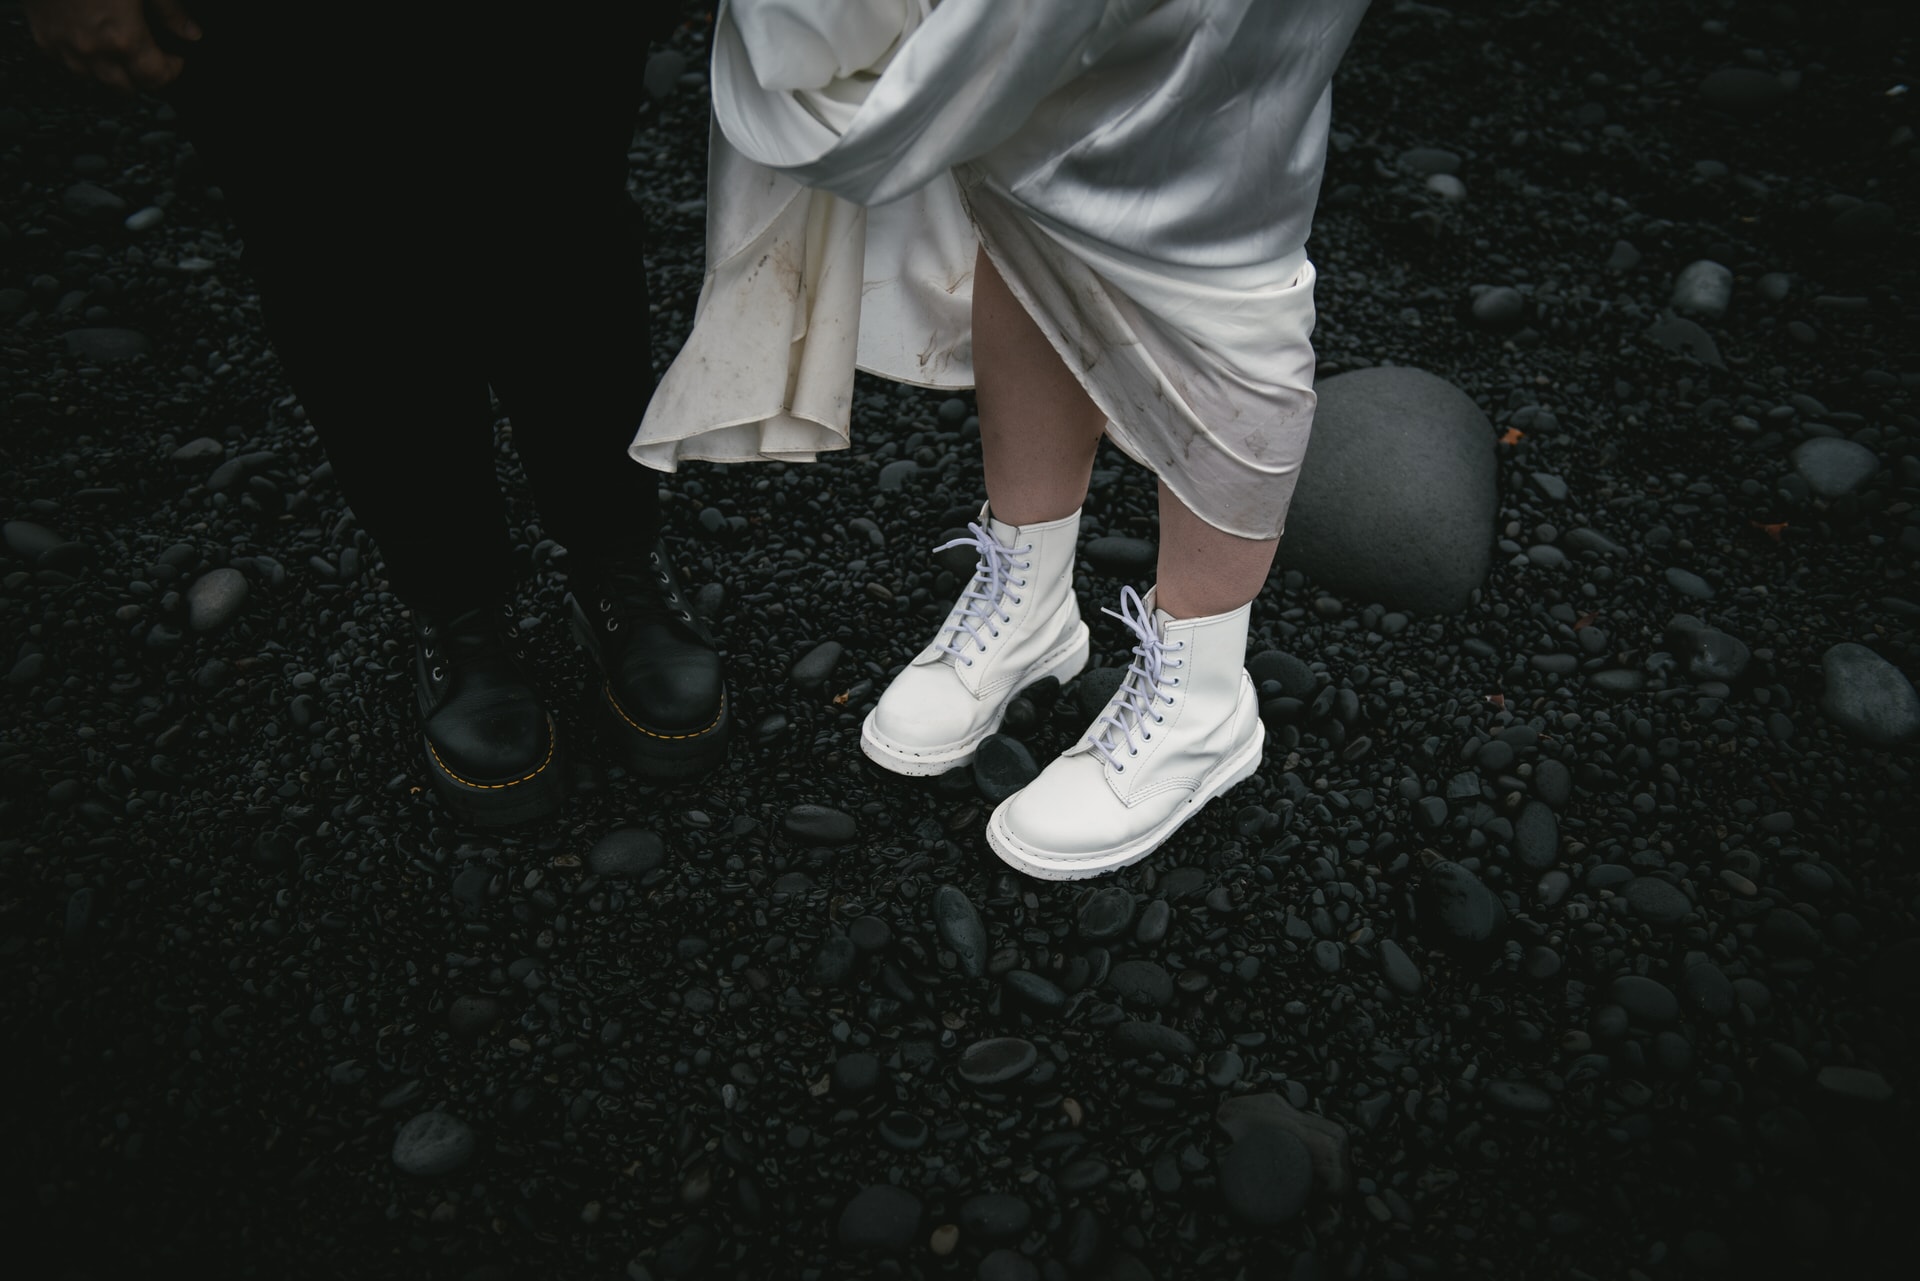 Bride's shoes on a black sand beach in Iceland